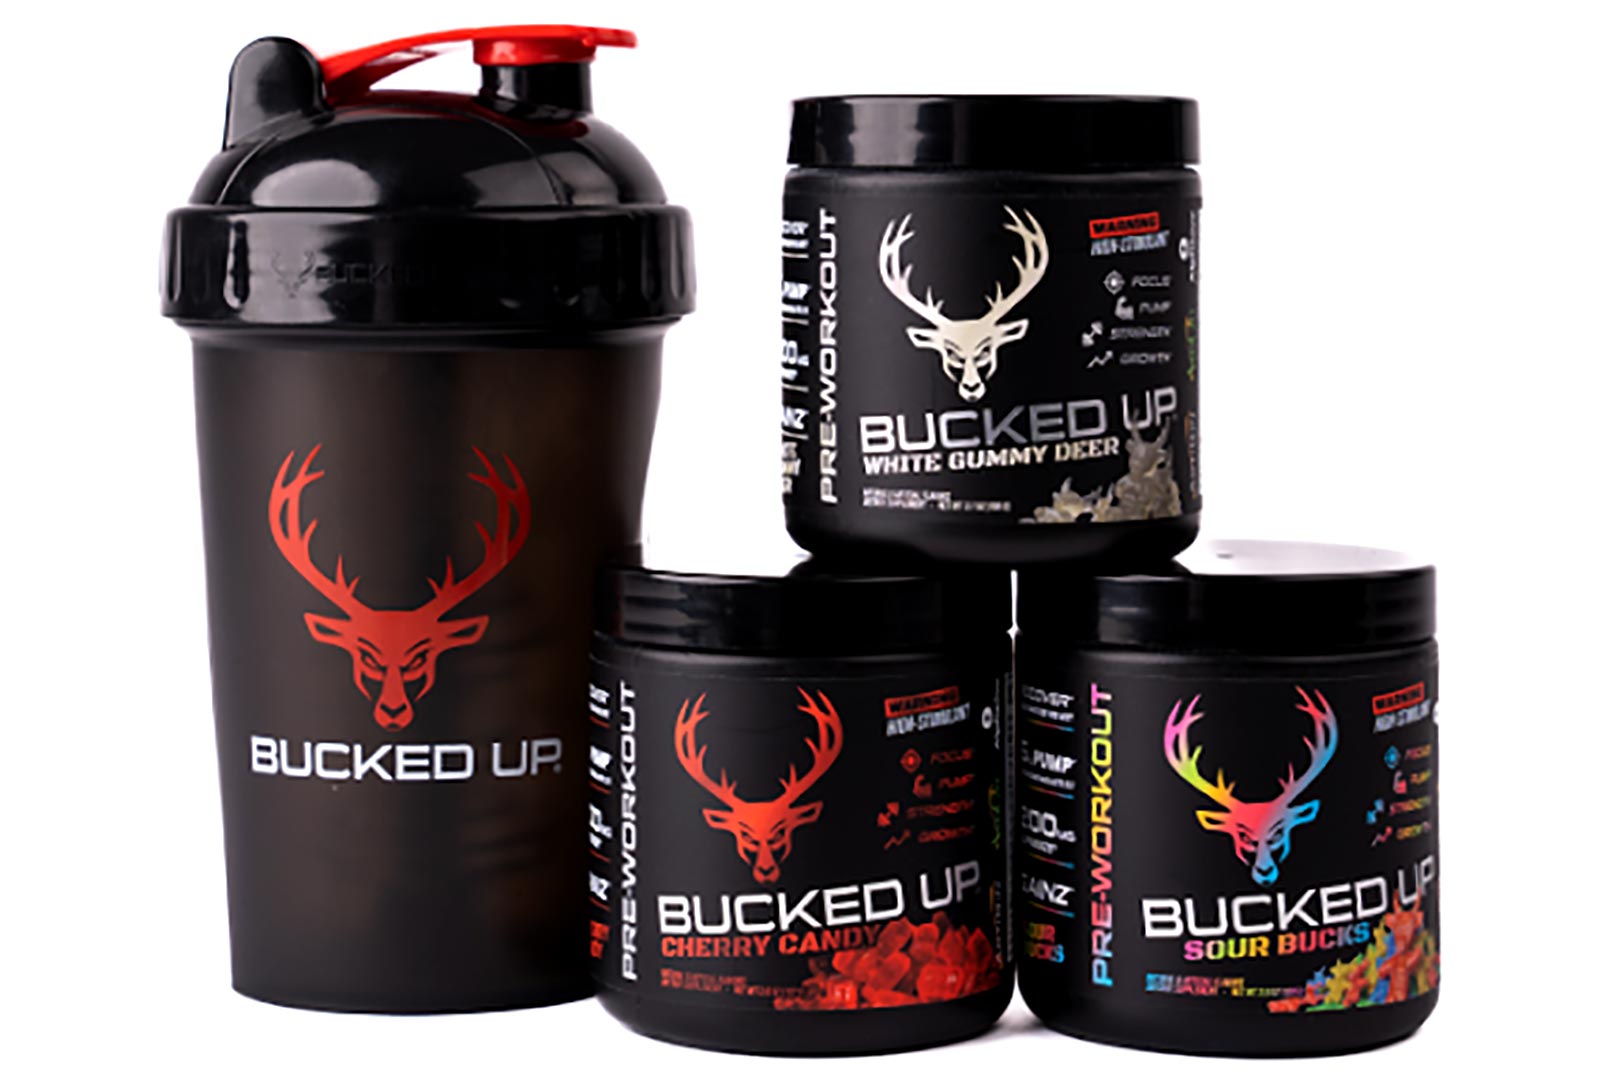 Bucked Up begins selling its travel tubs of Bucked Up and BAMF